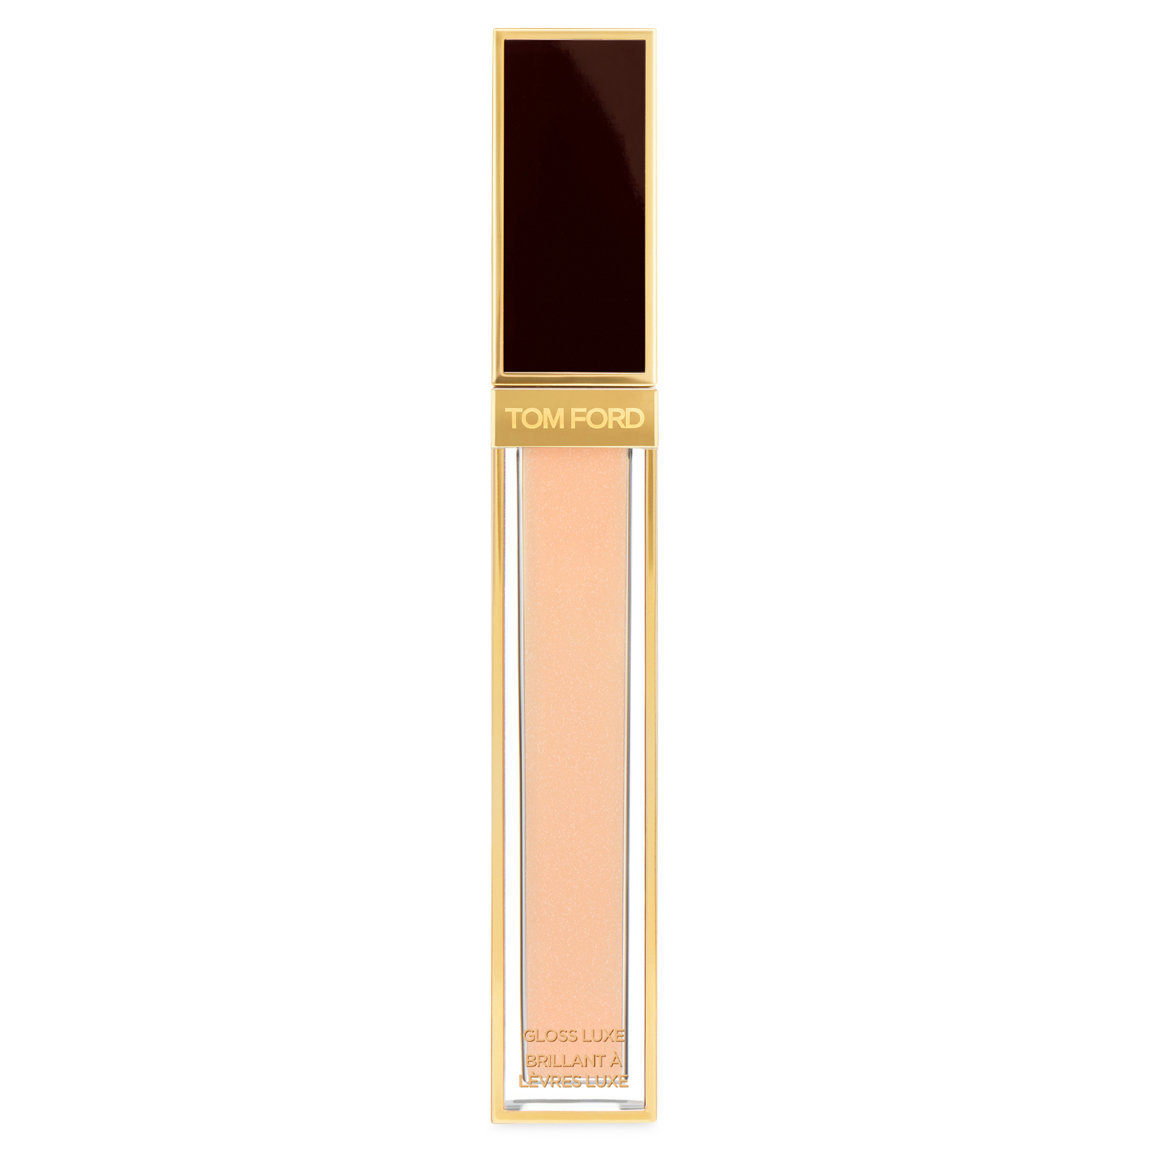 TOM FORD Gloss Luxe Crystalline alternative view 1.